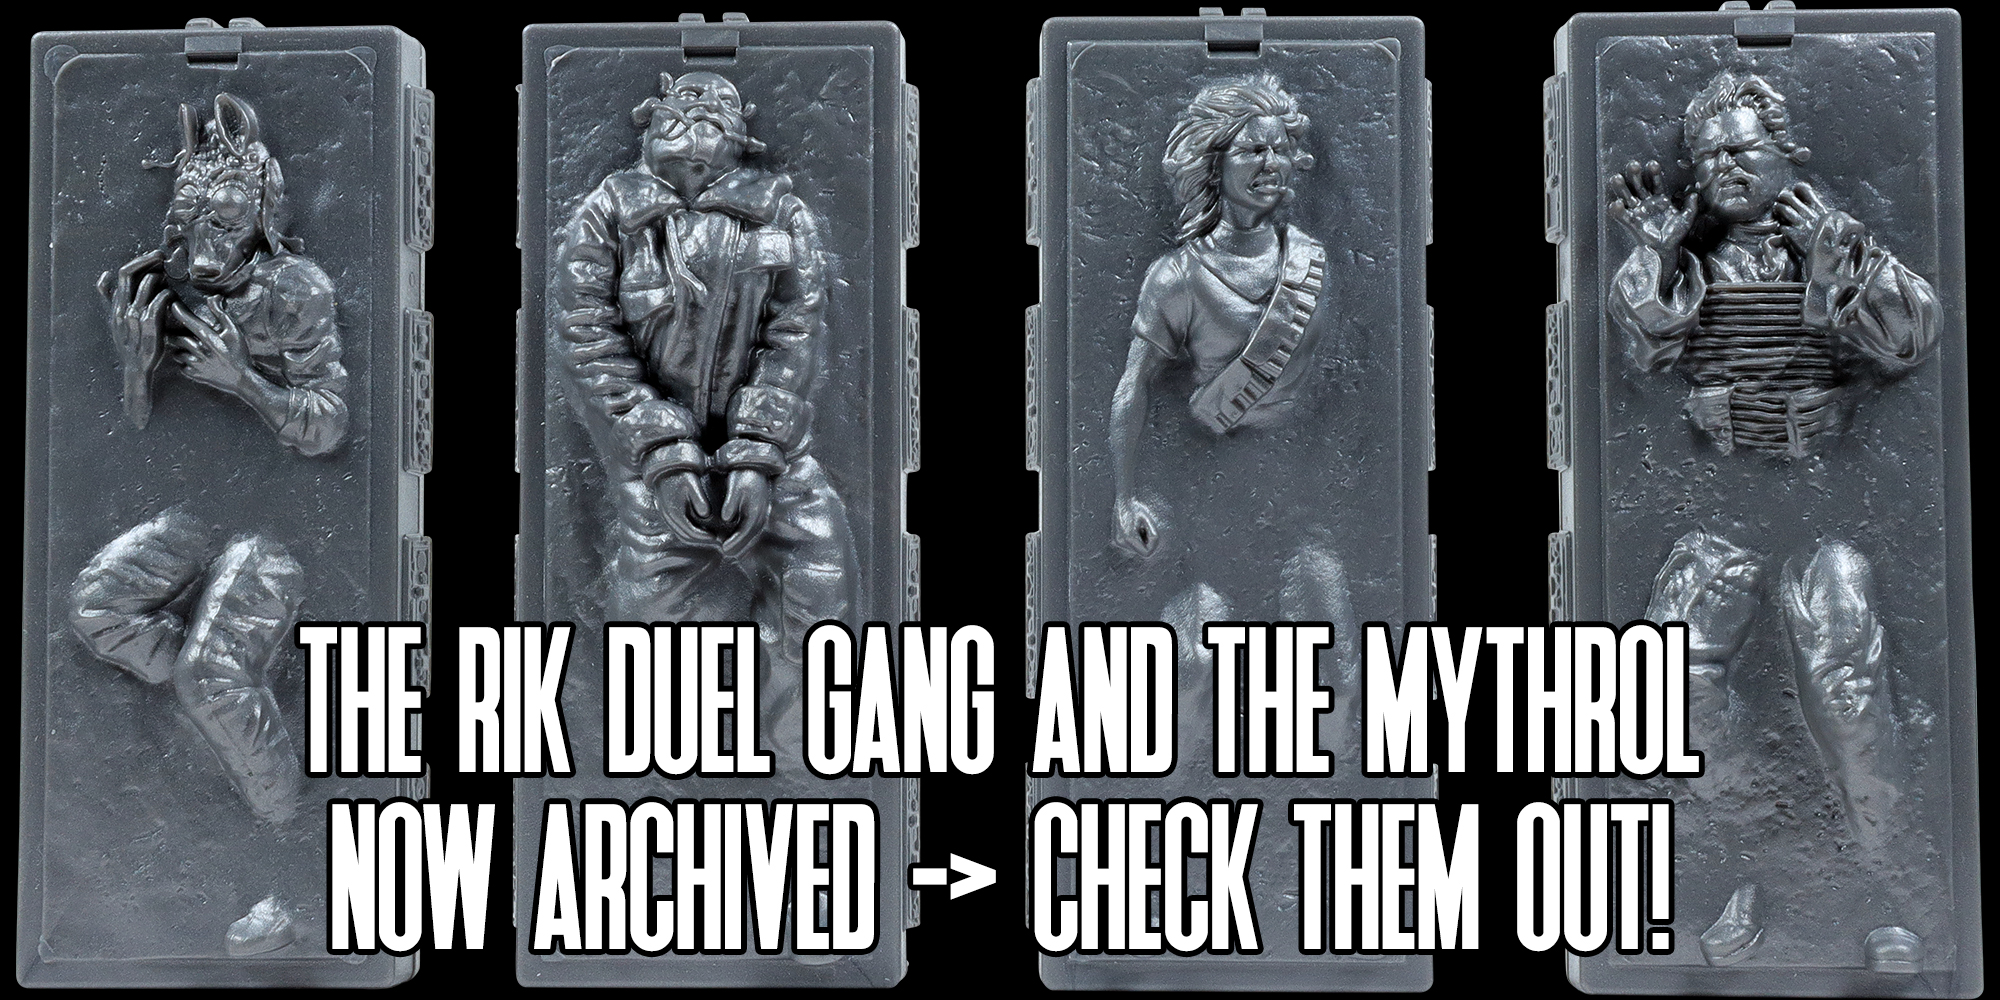 The Razor Crest Carbonite Blocks Archived - Check Them Out!